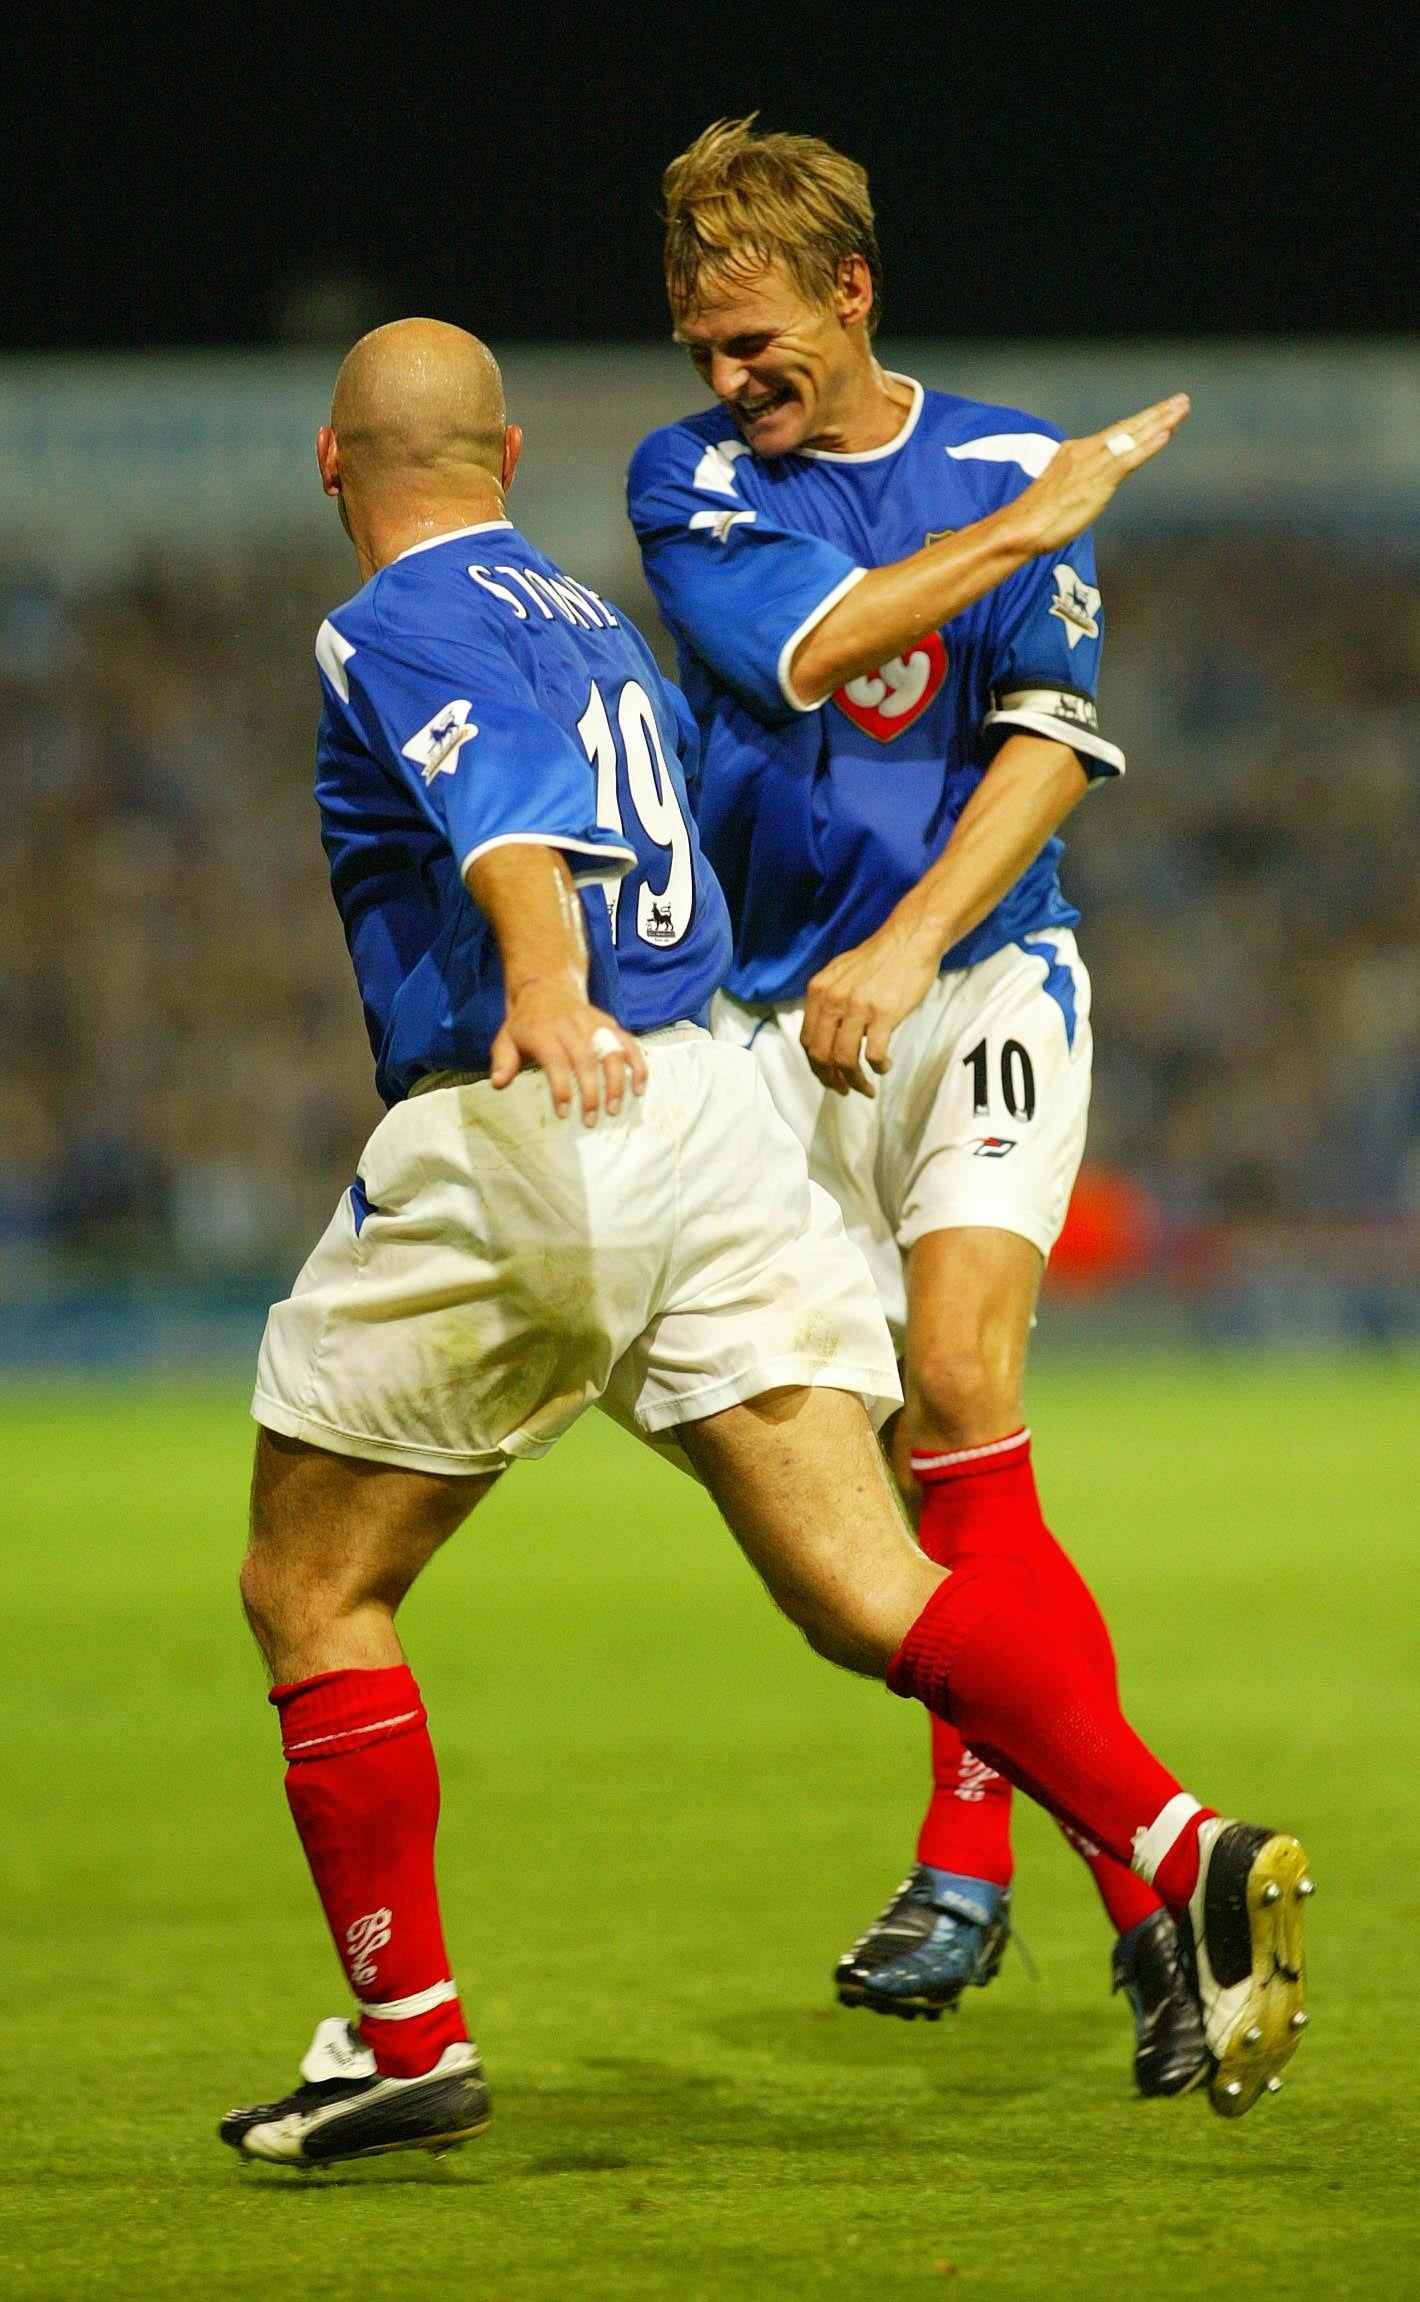 A 37-year-old Teddy Sheringham, right, celebrates a goal for Portsmouth (Chris Ison/PA)